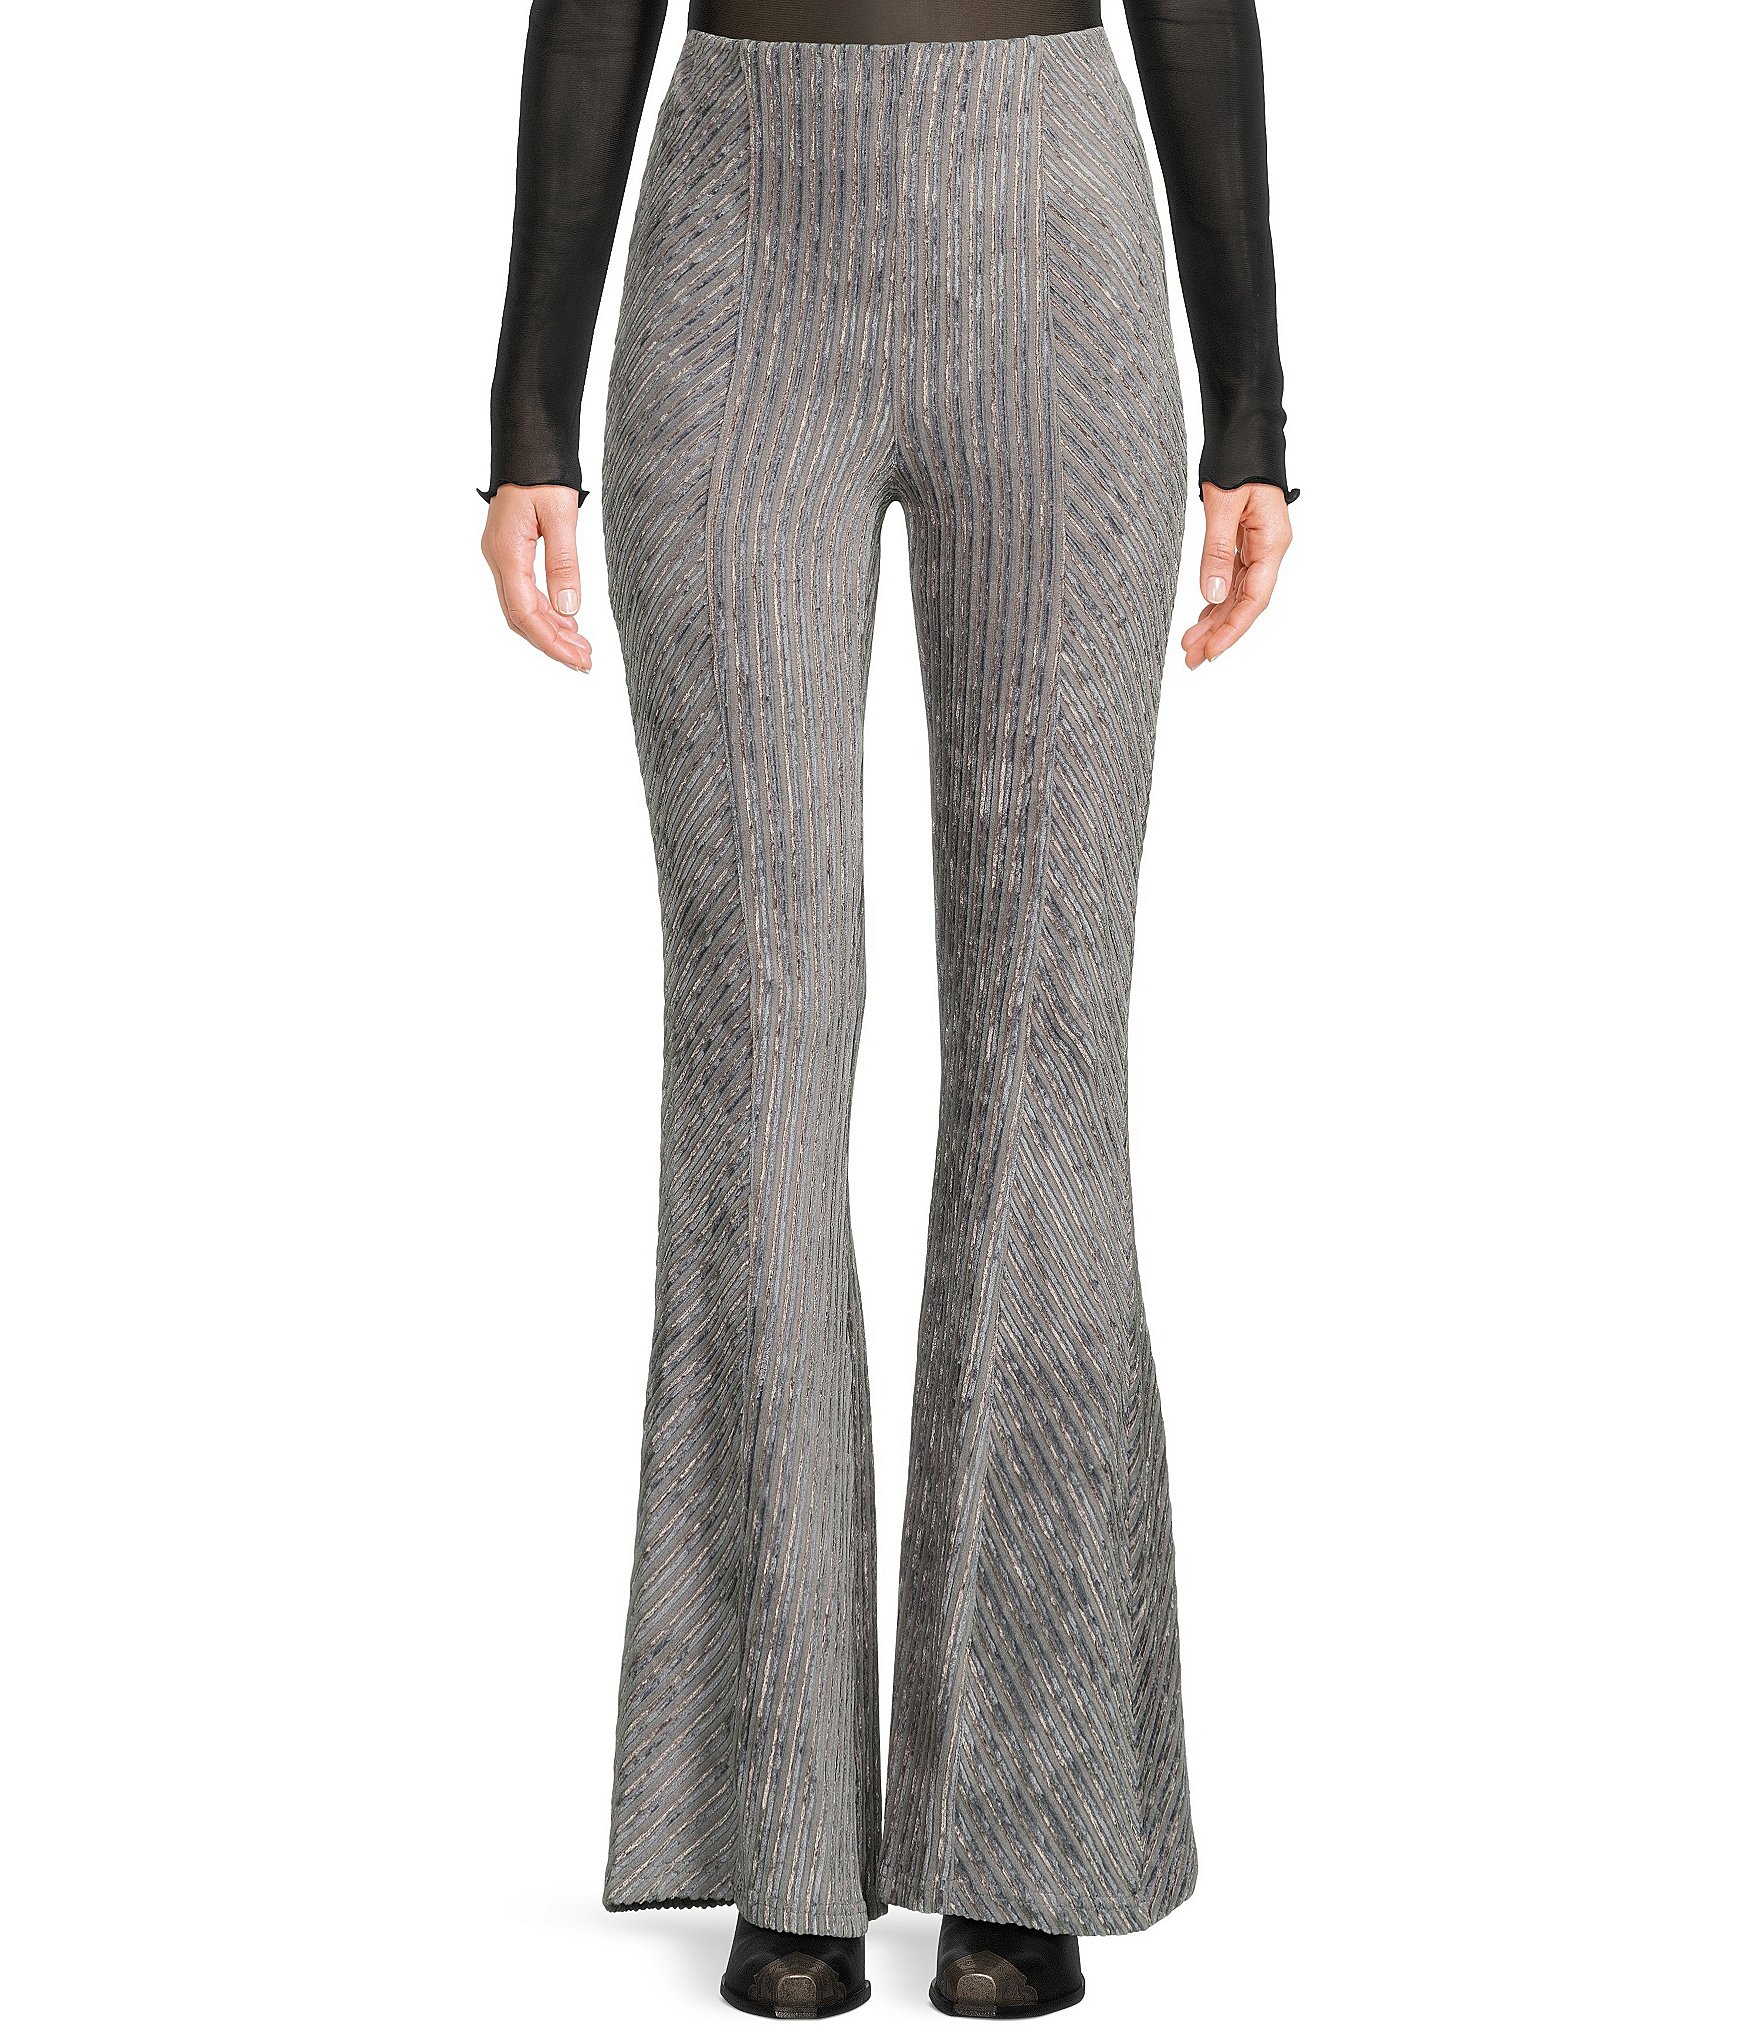 FREE PEOPLE Velvet SO CHARMING Ribbed Pullon Flare Pant – Silver Accents